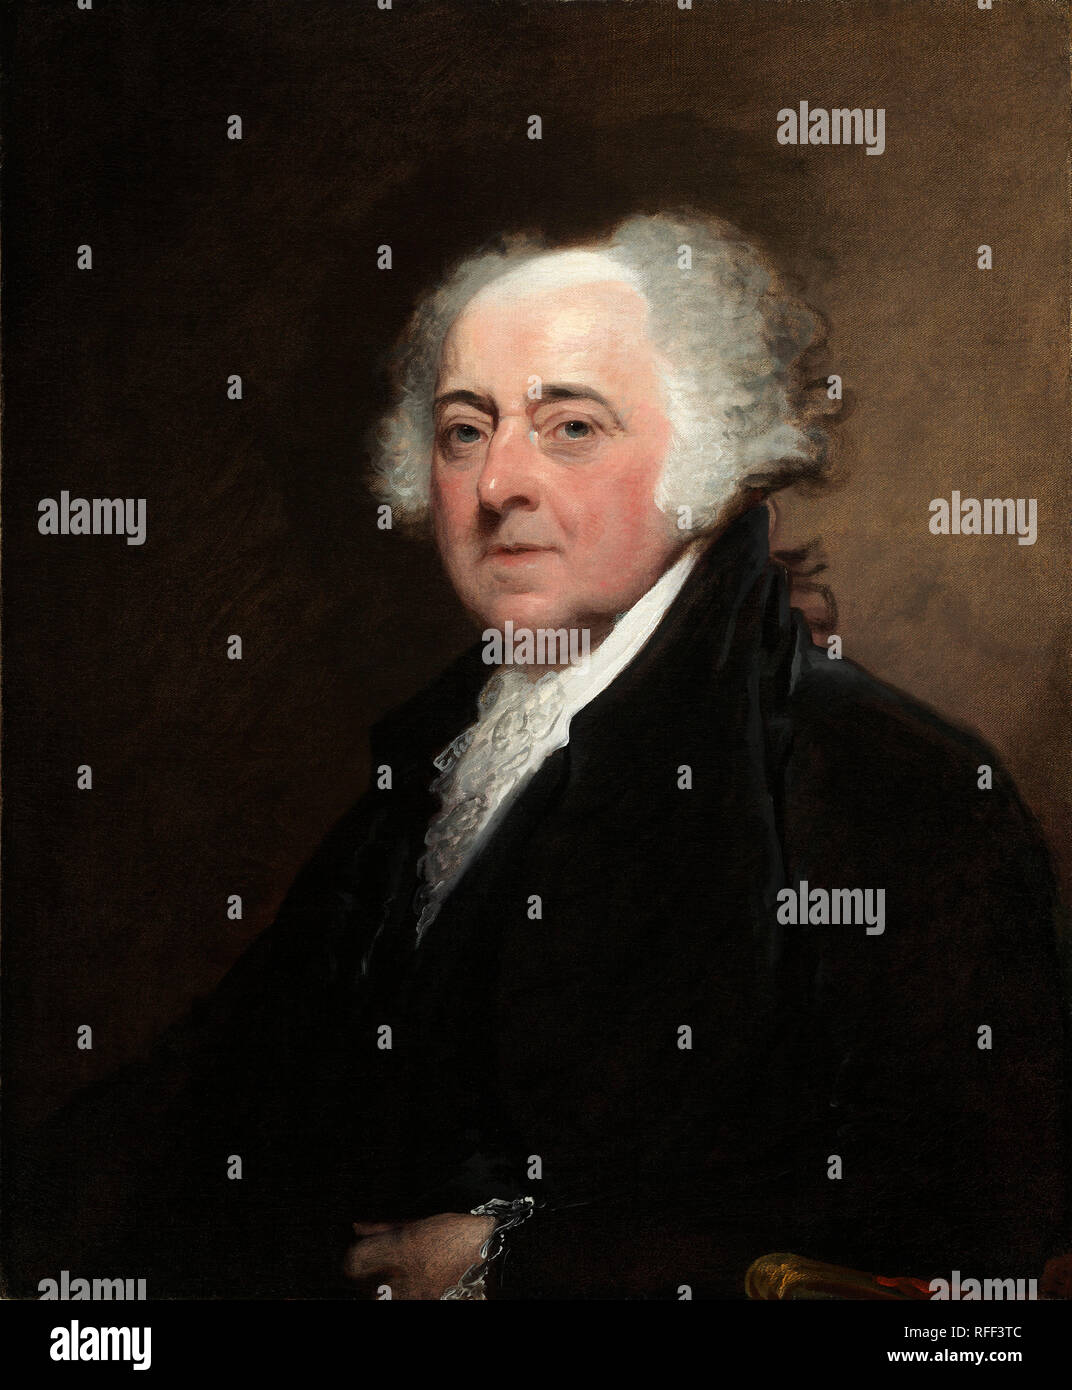 John Adams. Dated: c. 1800/1815. Dimensions: overall: 73.7 x 61 cm (29 x 24 in.)  framed: 97.5 x 84.5 x 10.8 cm (38 3/8 x 33 1/4 x 4 1/4 in.). Medium: oil on canvas. Museum: National Gallery of Art, Washington DC. Author: GILBERT STUART. Stock Photo